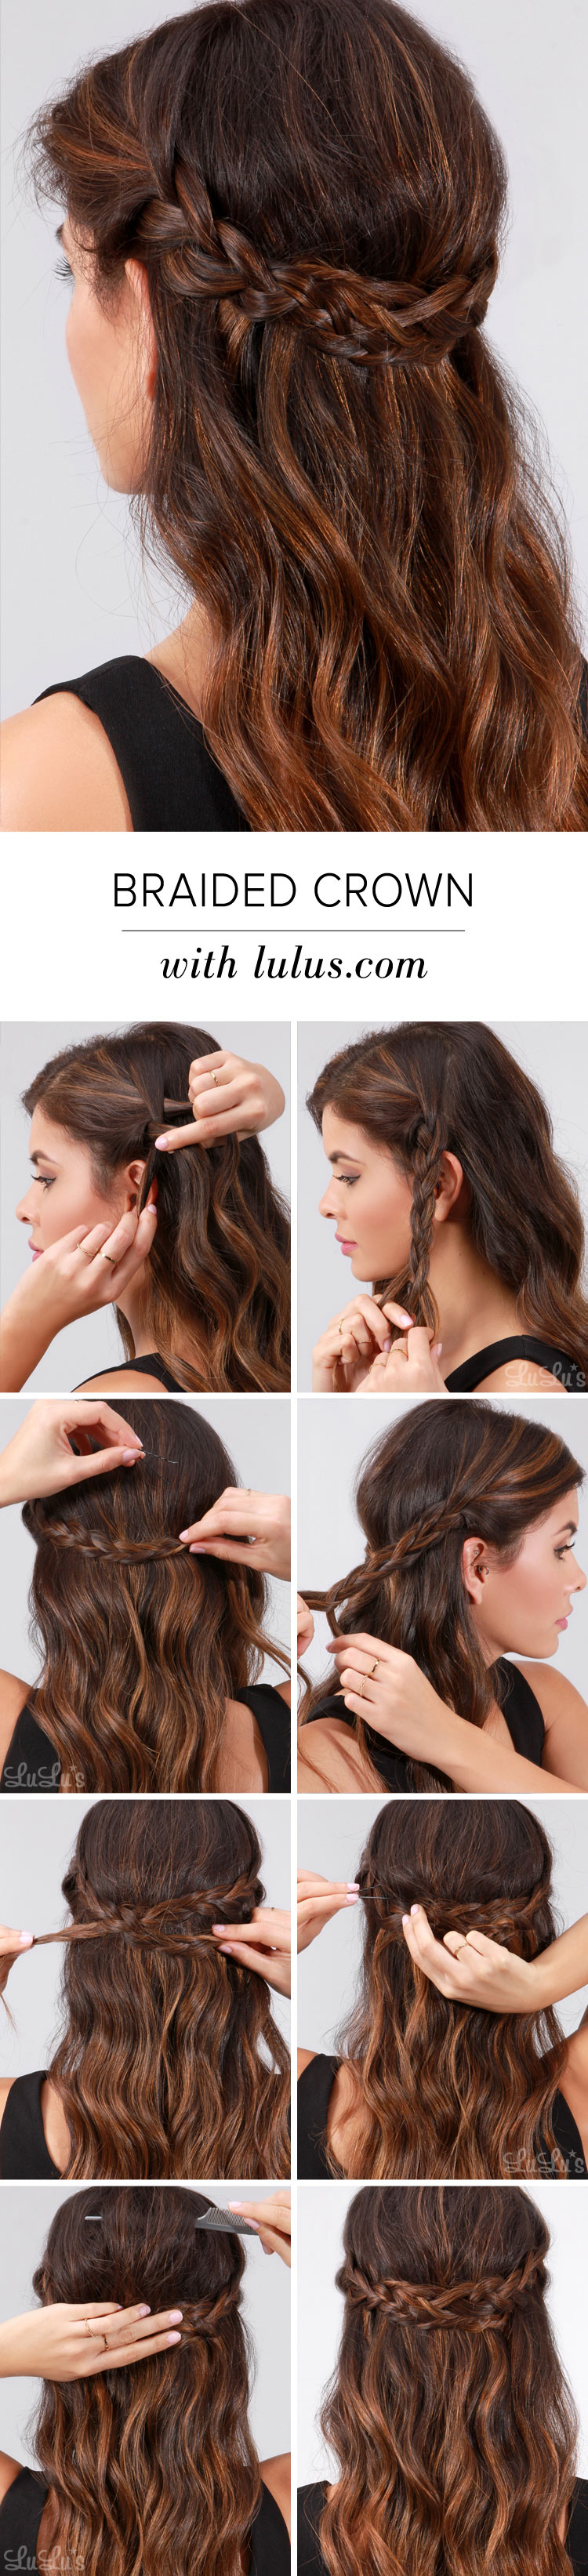 Step by Step Braided Hair Tutorials To Copy This Spring